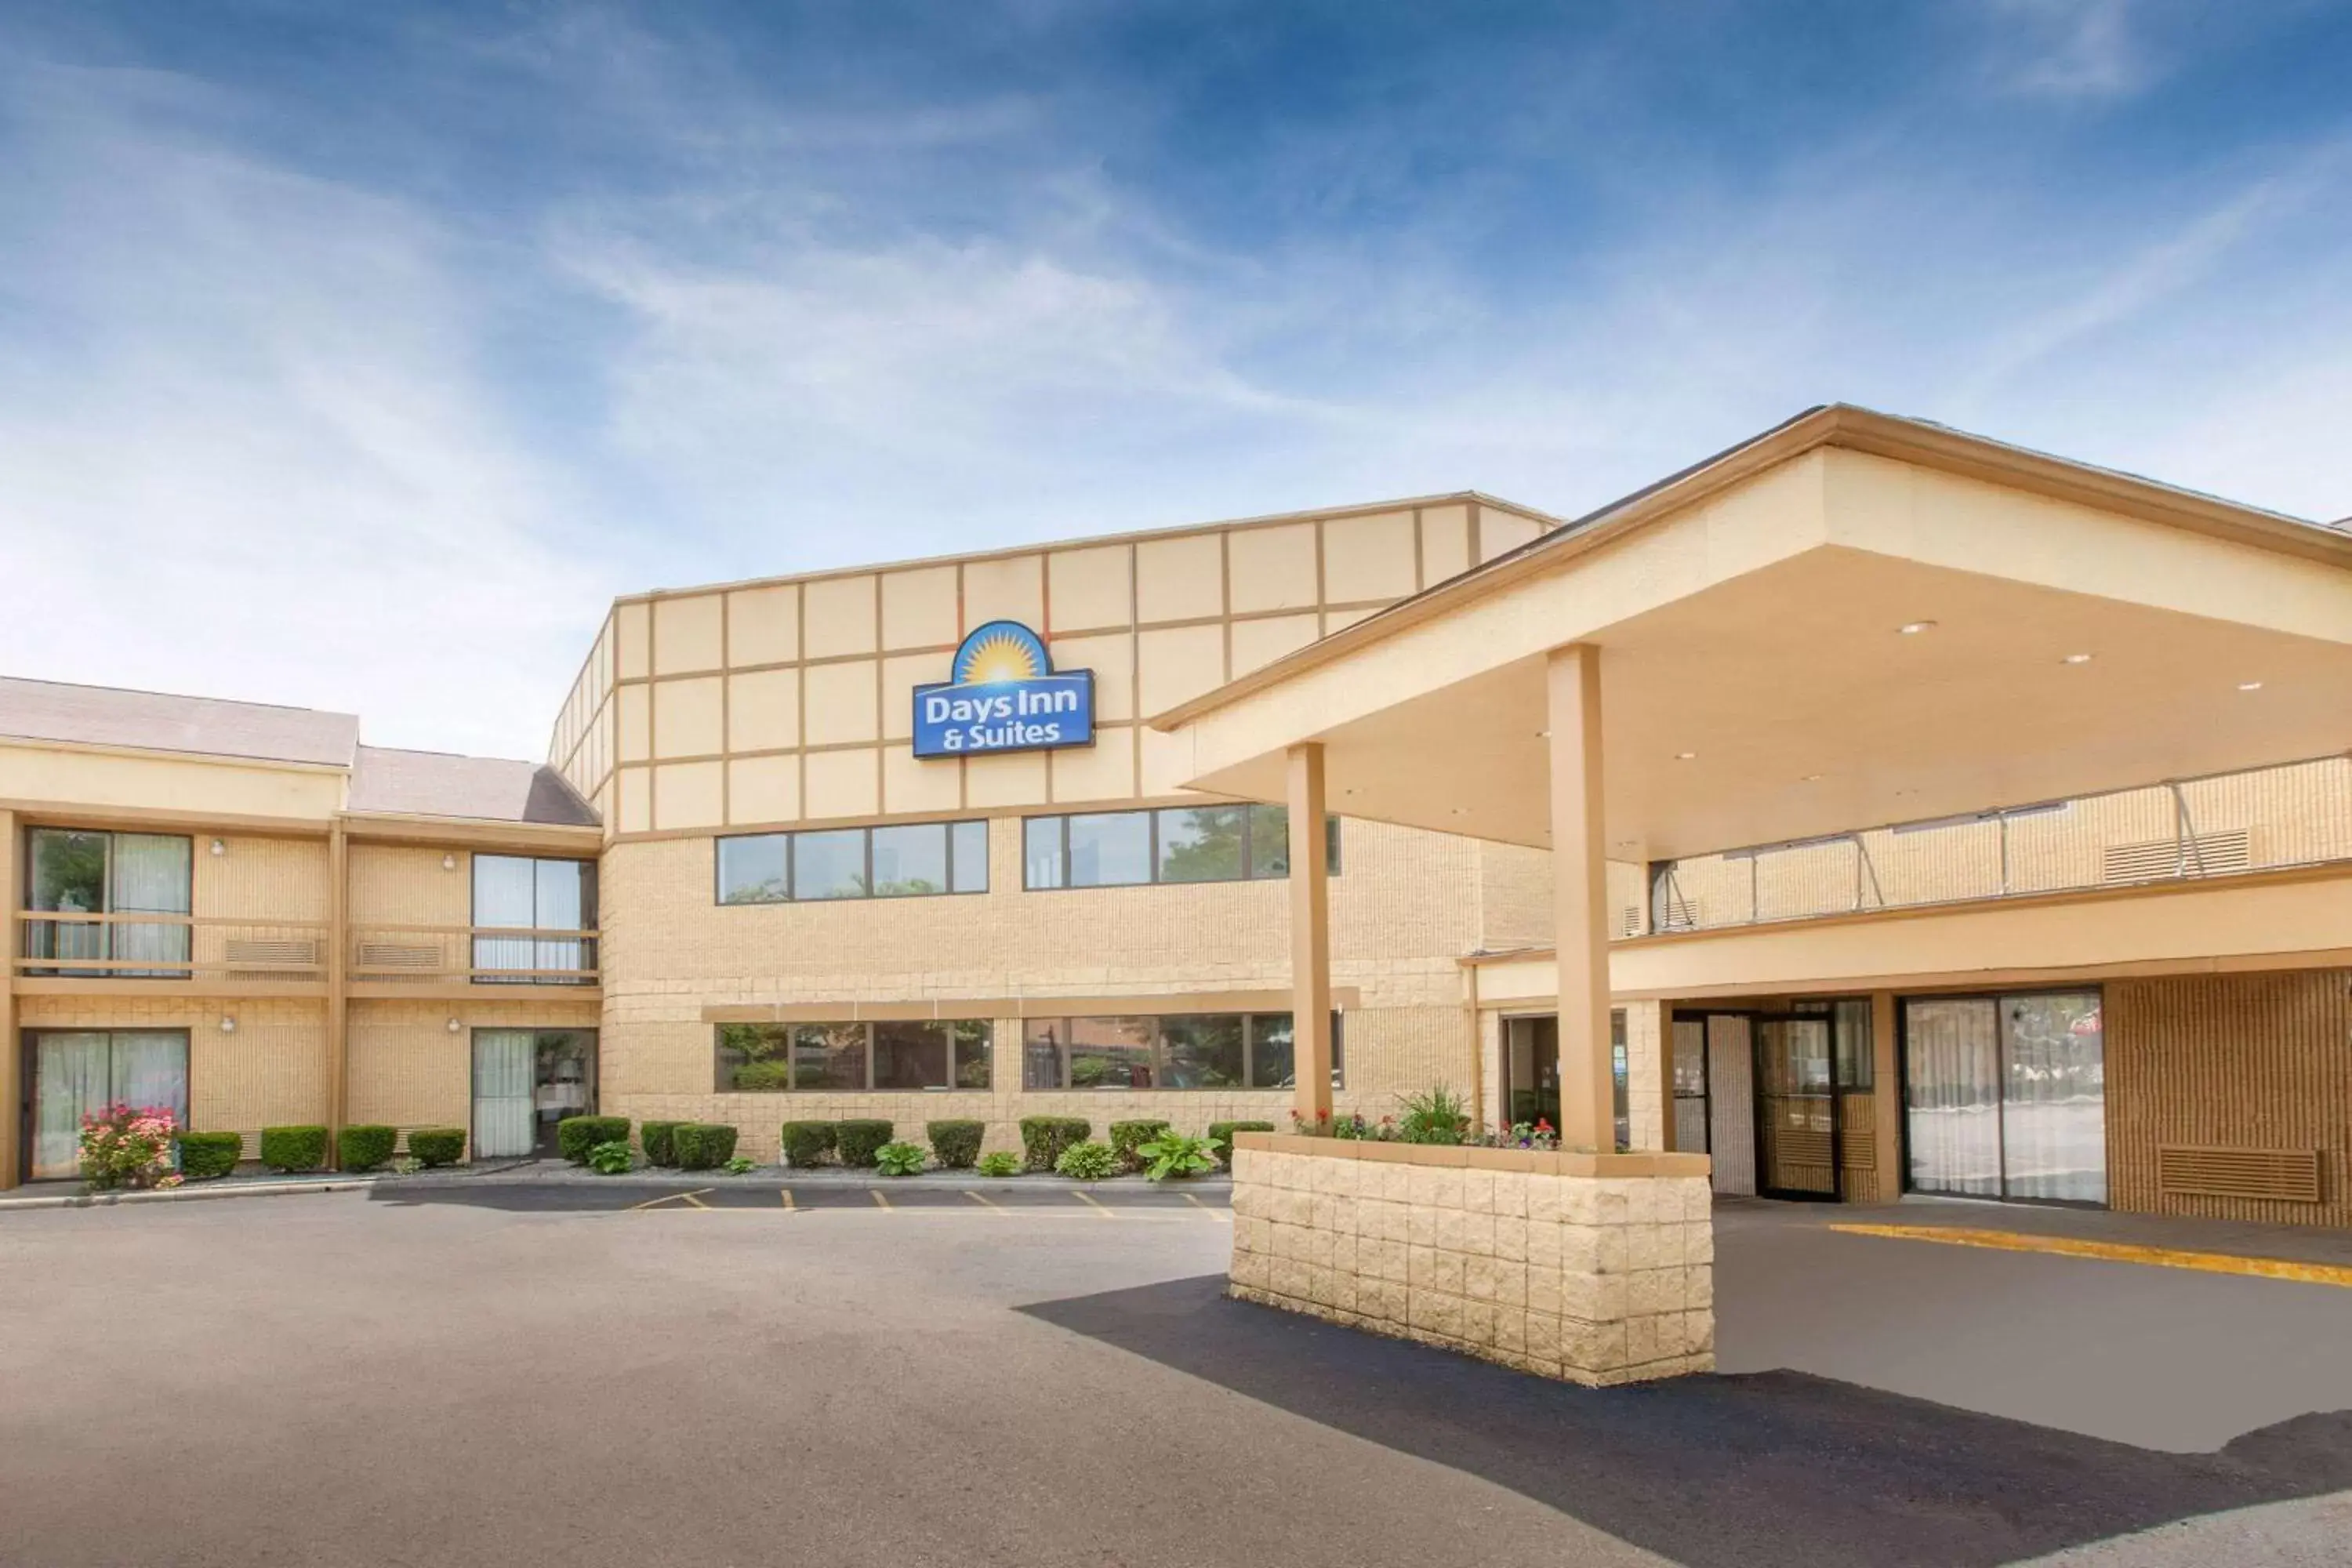 Property Building in Days Inn & Suites by Wyndham Madison Heights MI